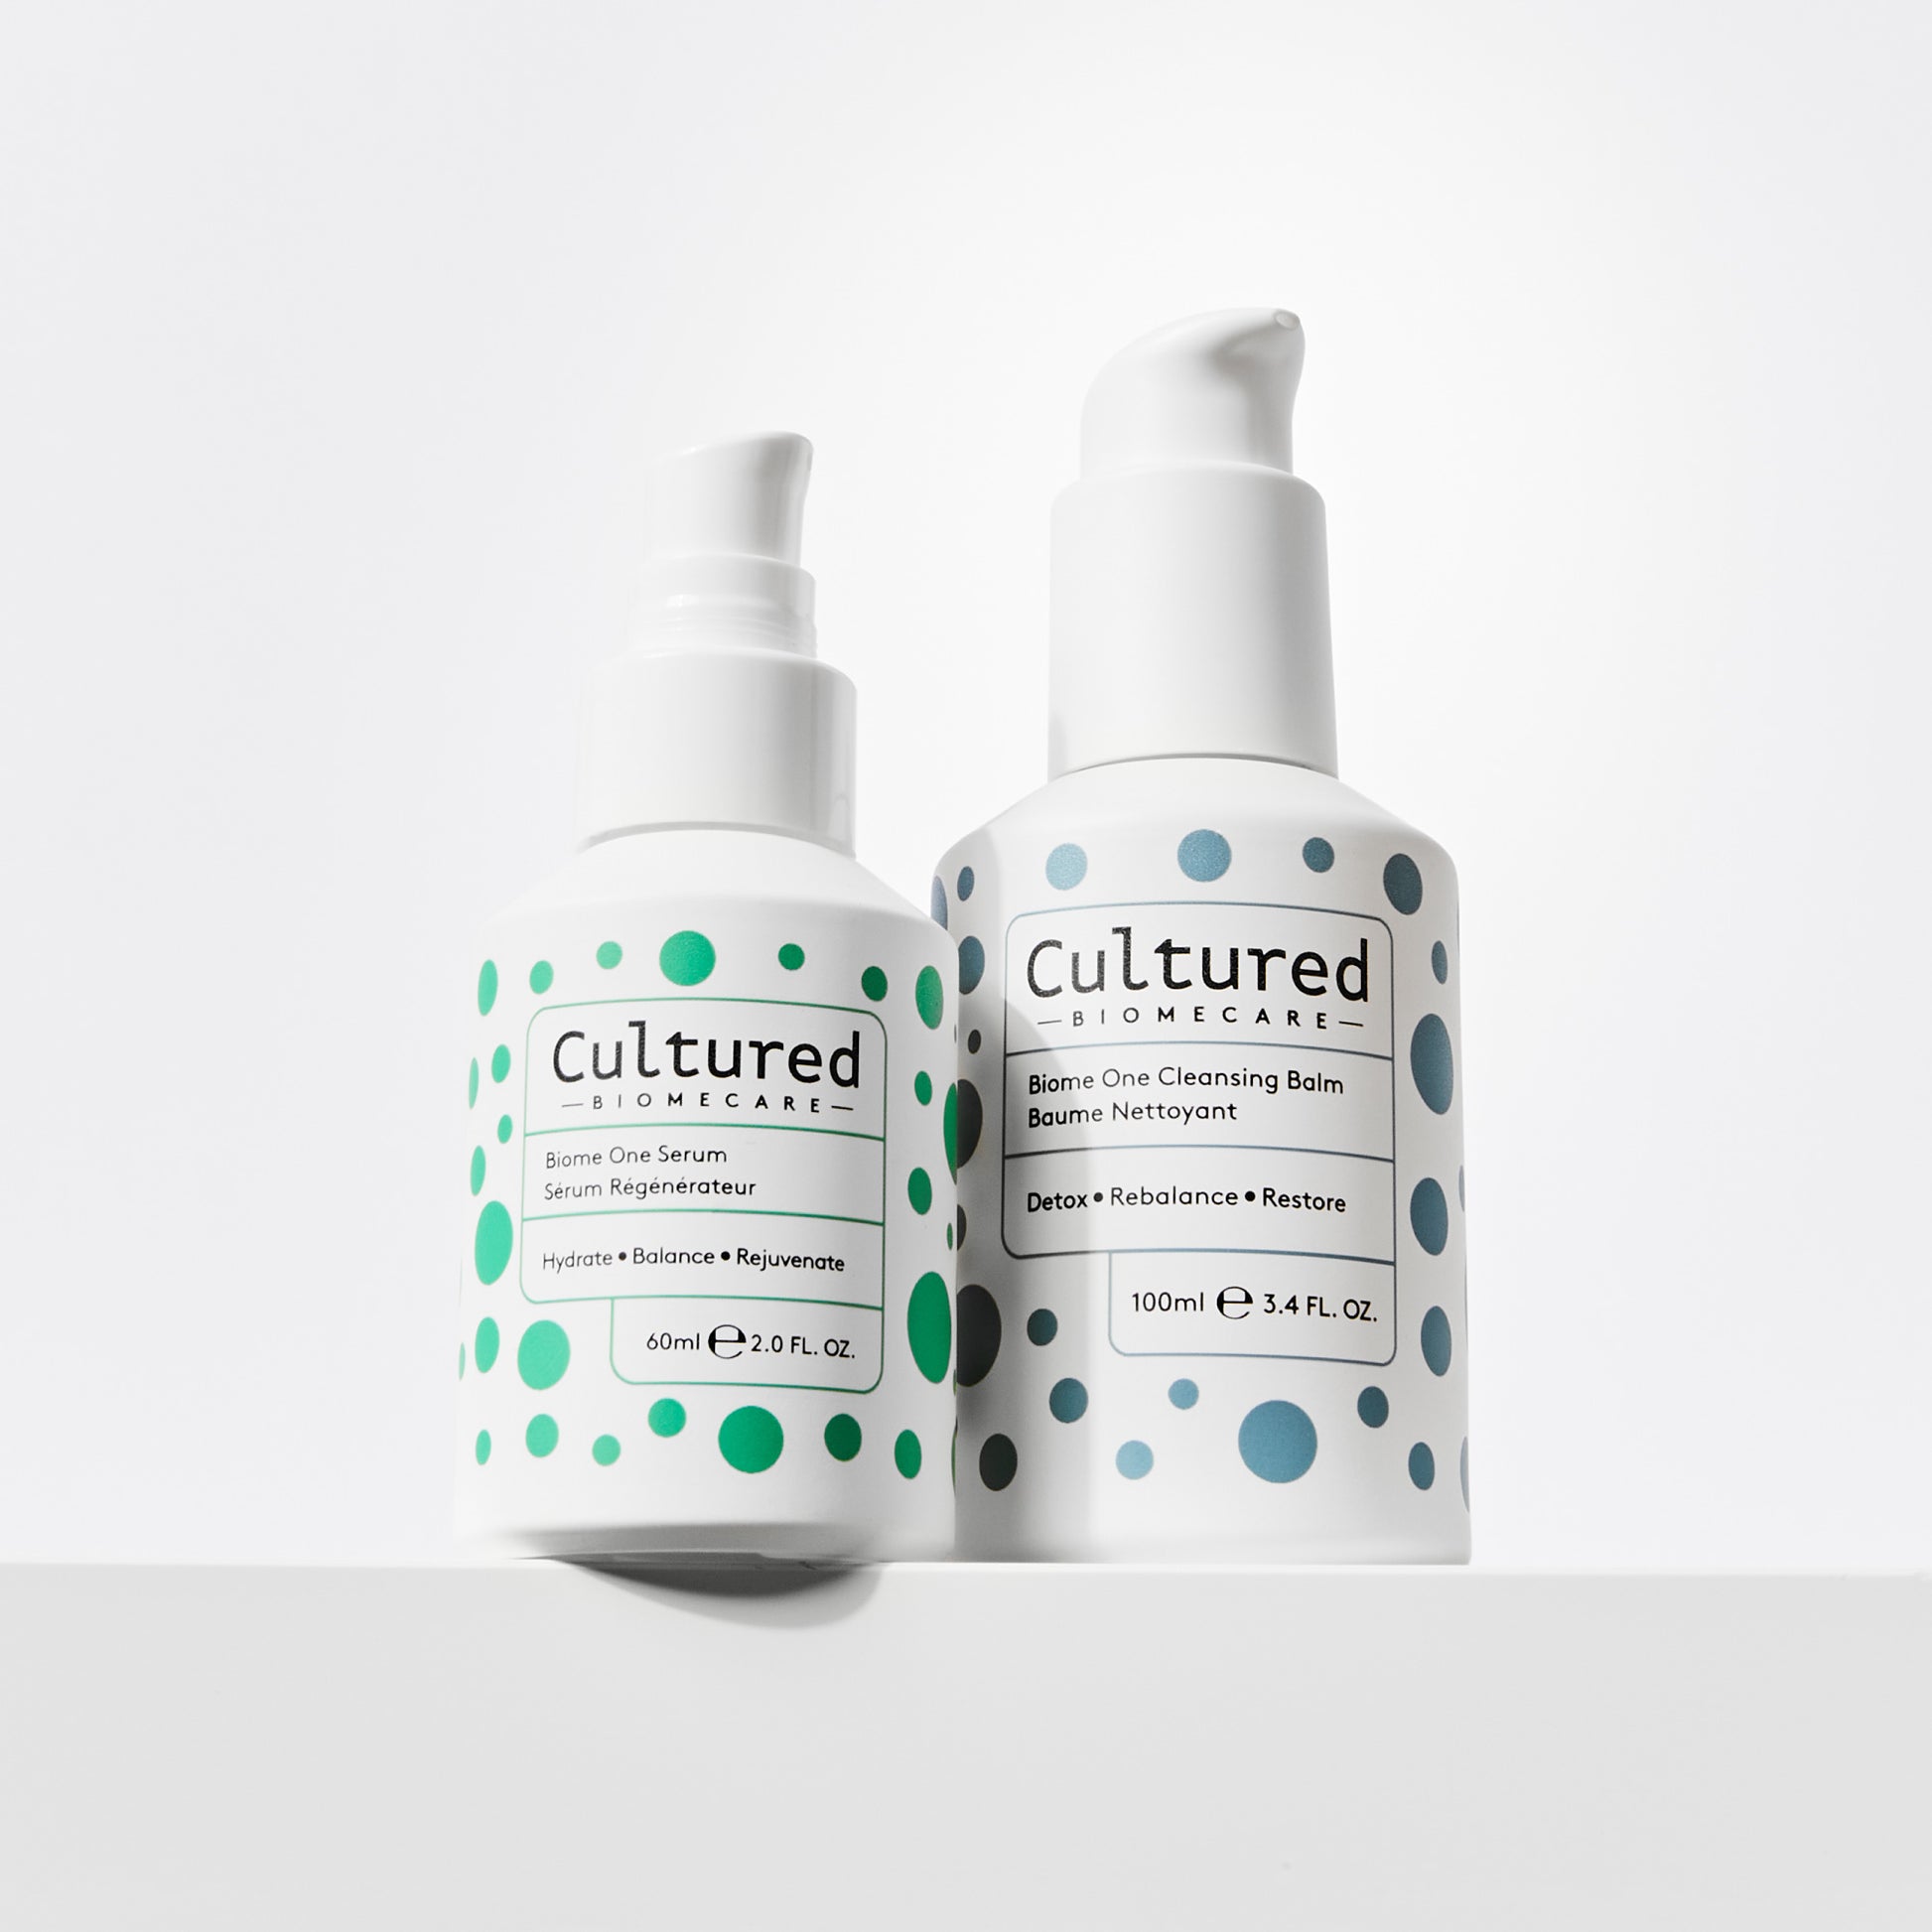 Cultured Biomecare Biome One Serum and Cleansing Balm sit side by side on a white shelf against a white background.